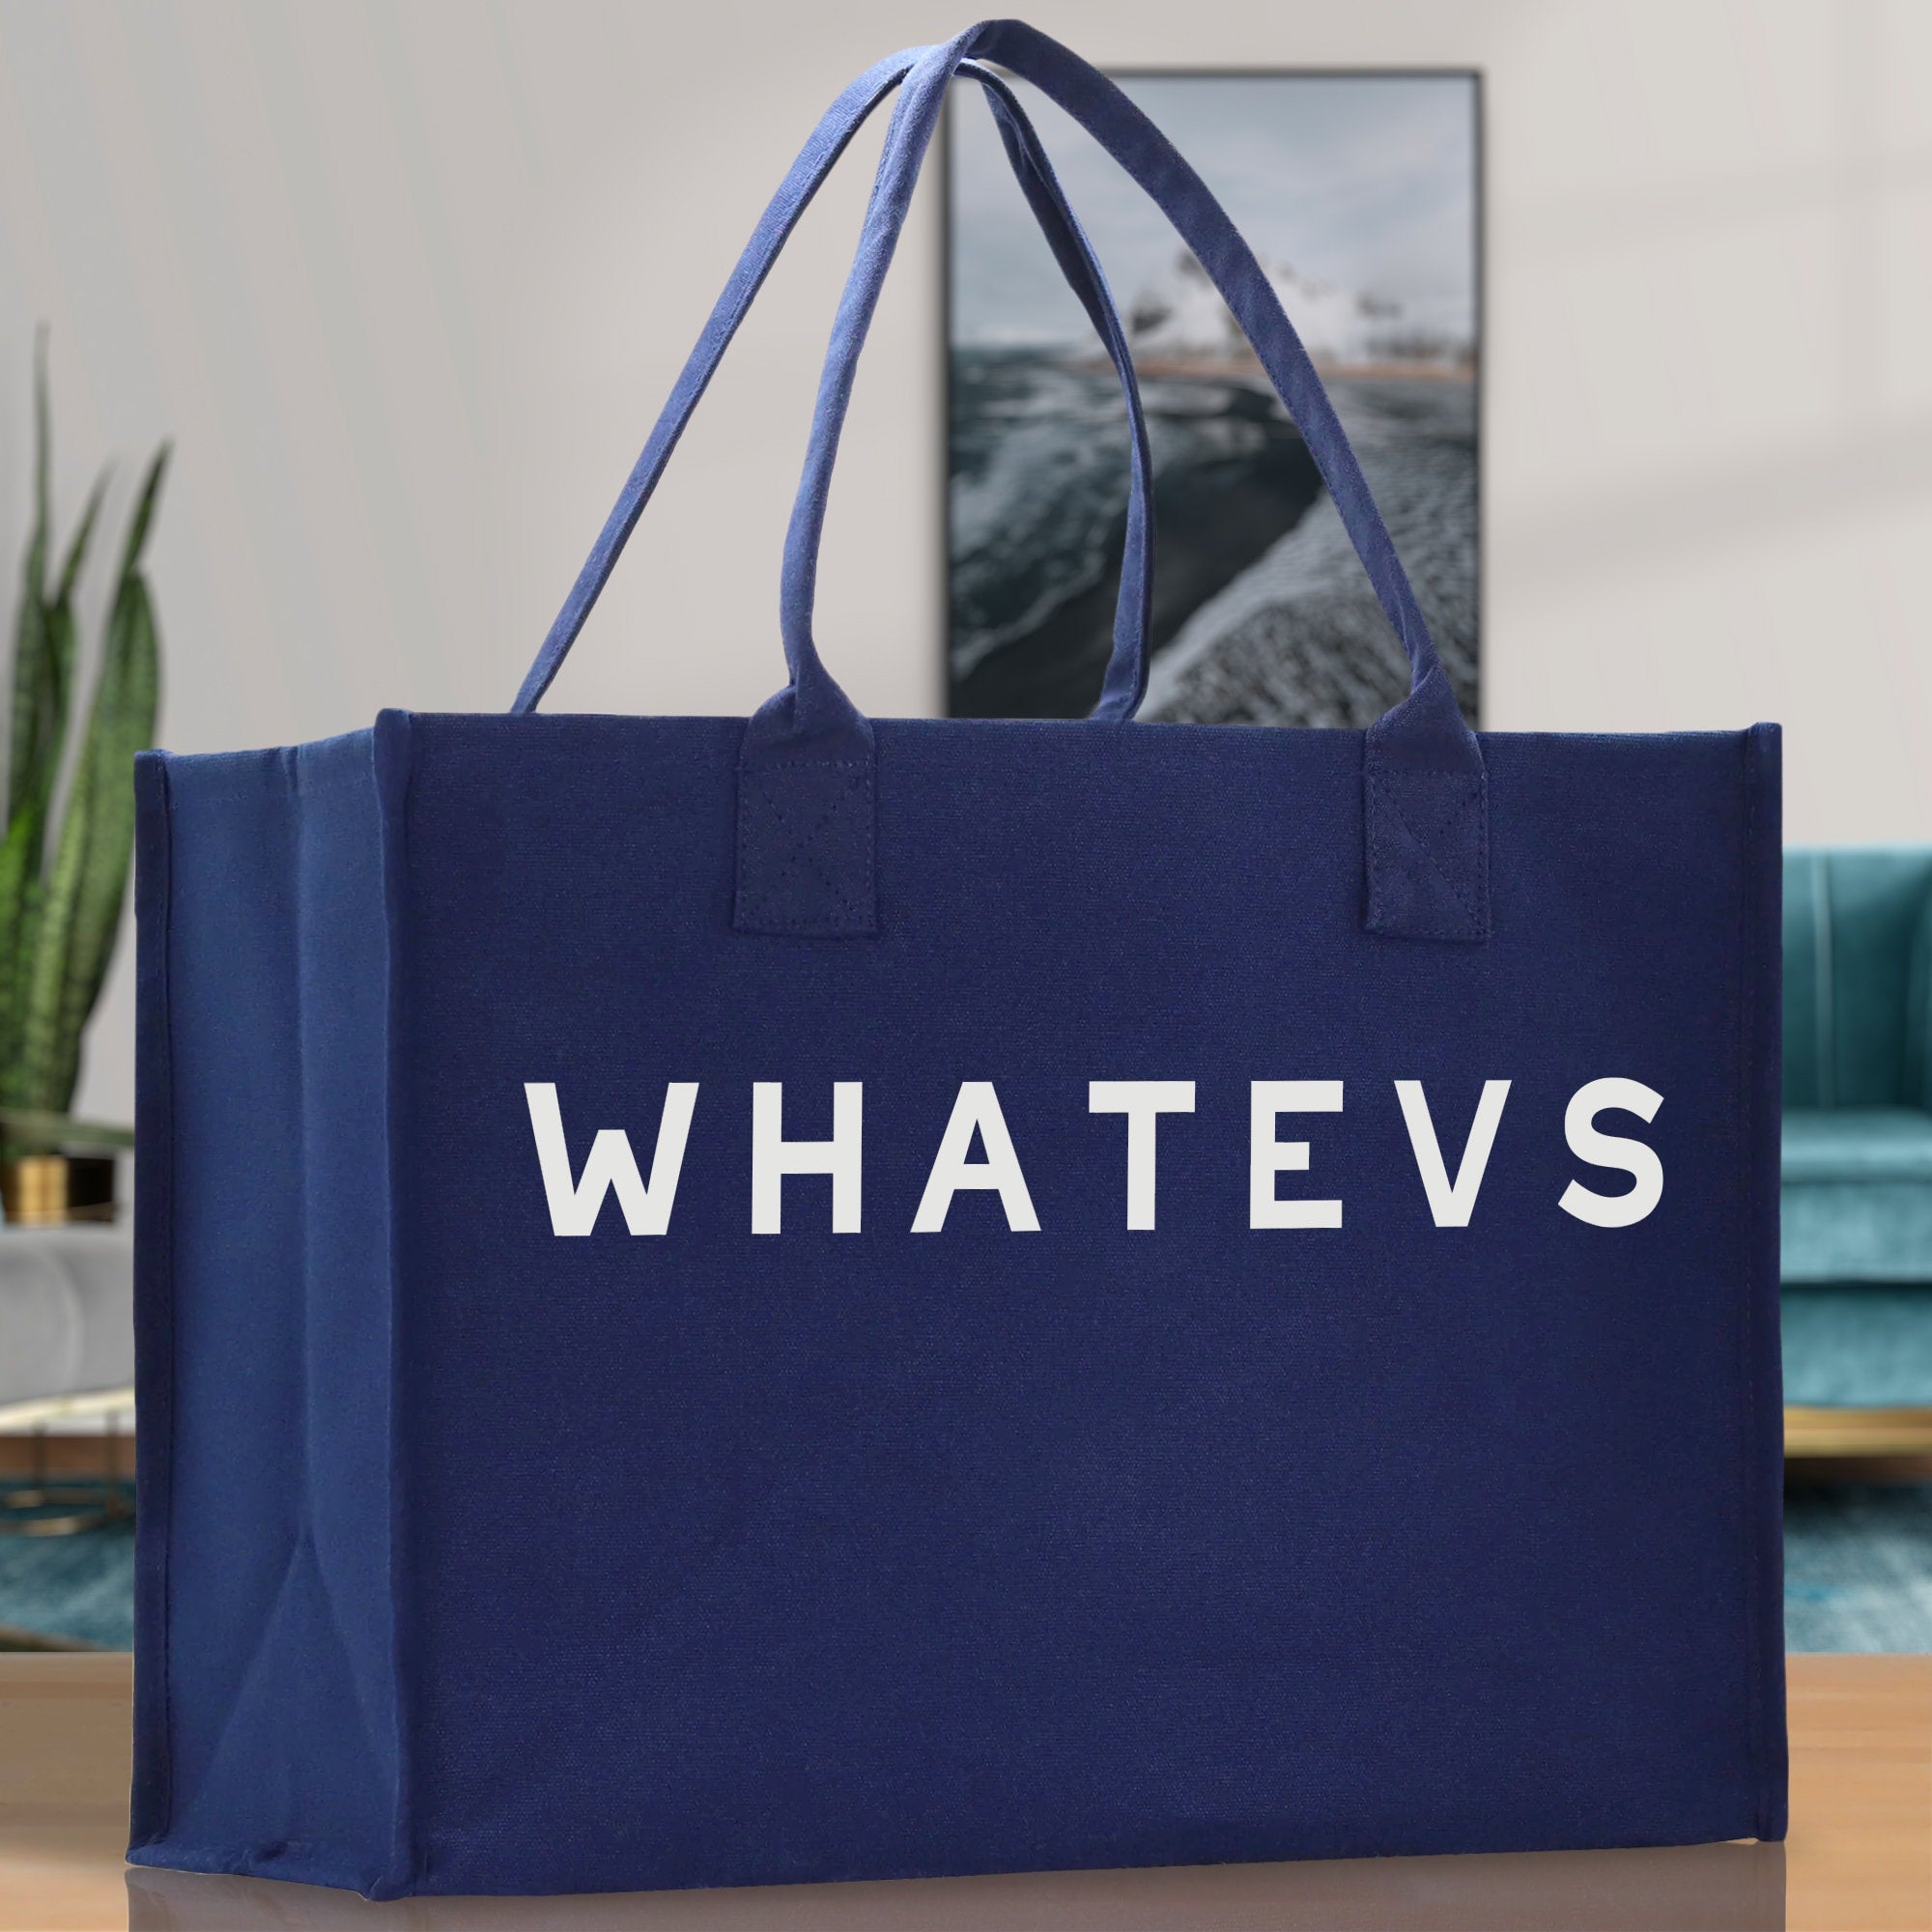 Whatevs Cotton Canvas Chic Beach Tote Bag Multipurpose Tote Weekender Tote Gift for Her Outdoor Tote Vacation Tote Large Beach Bag